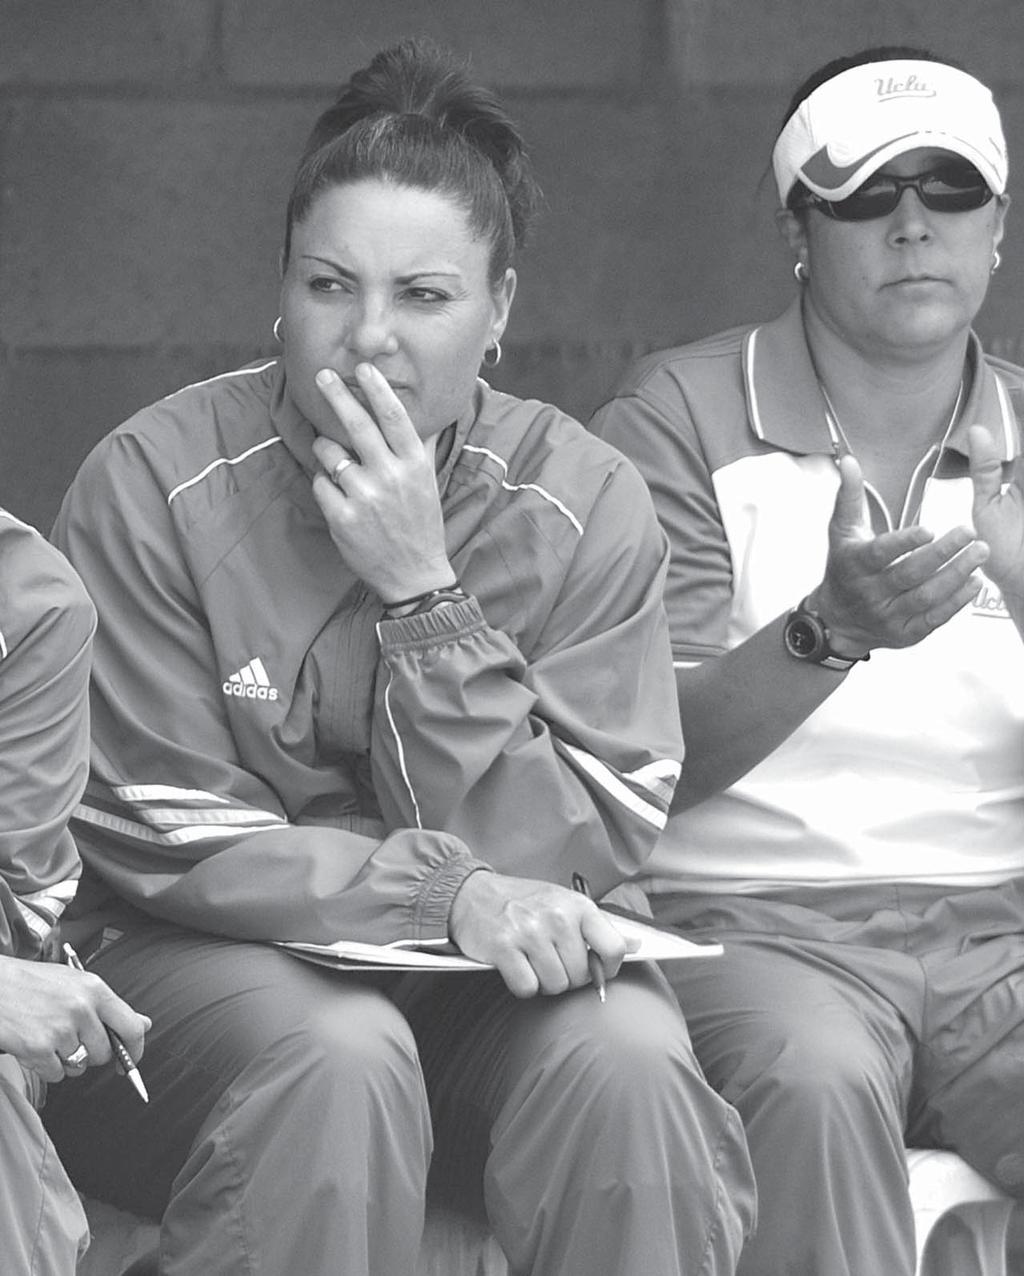 LISA FERNANDEZ ASSISTANT COACH 10TH YEAR UCLA, 1995 One of the most recognizable names in the sport of softball, Lisa Fernandez enters her 10th season on the Bruin coaching staff in 2007.